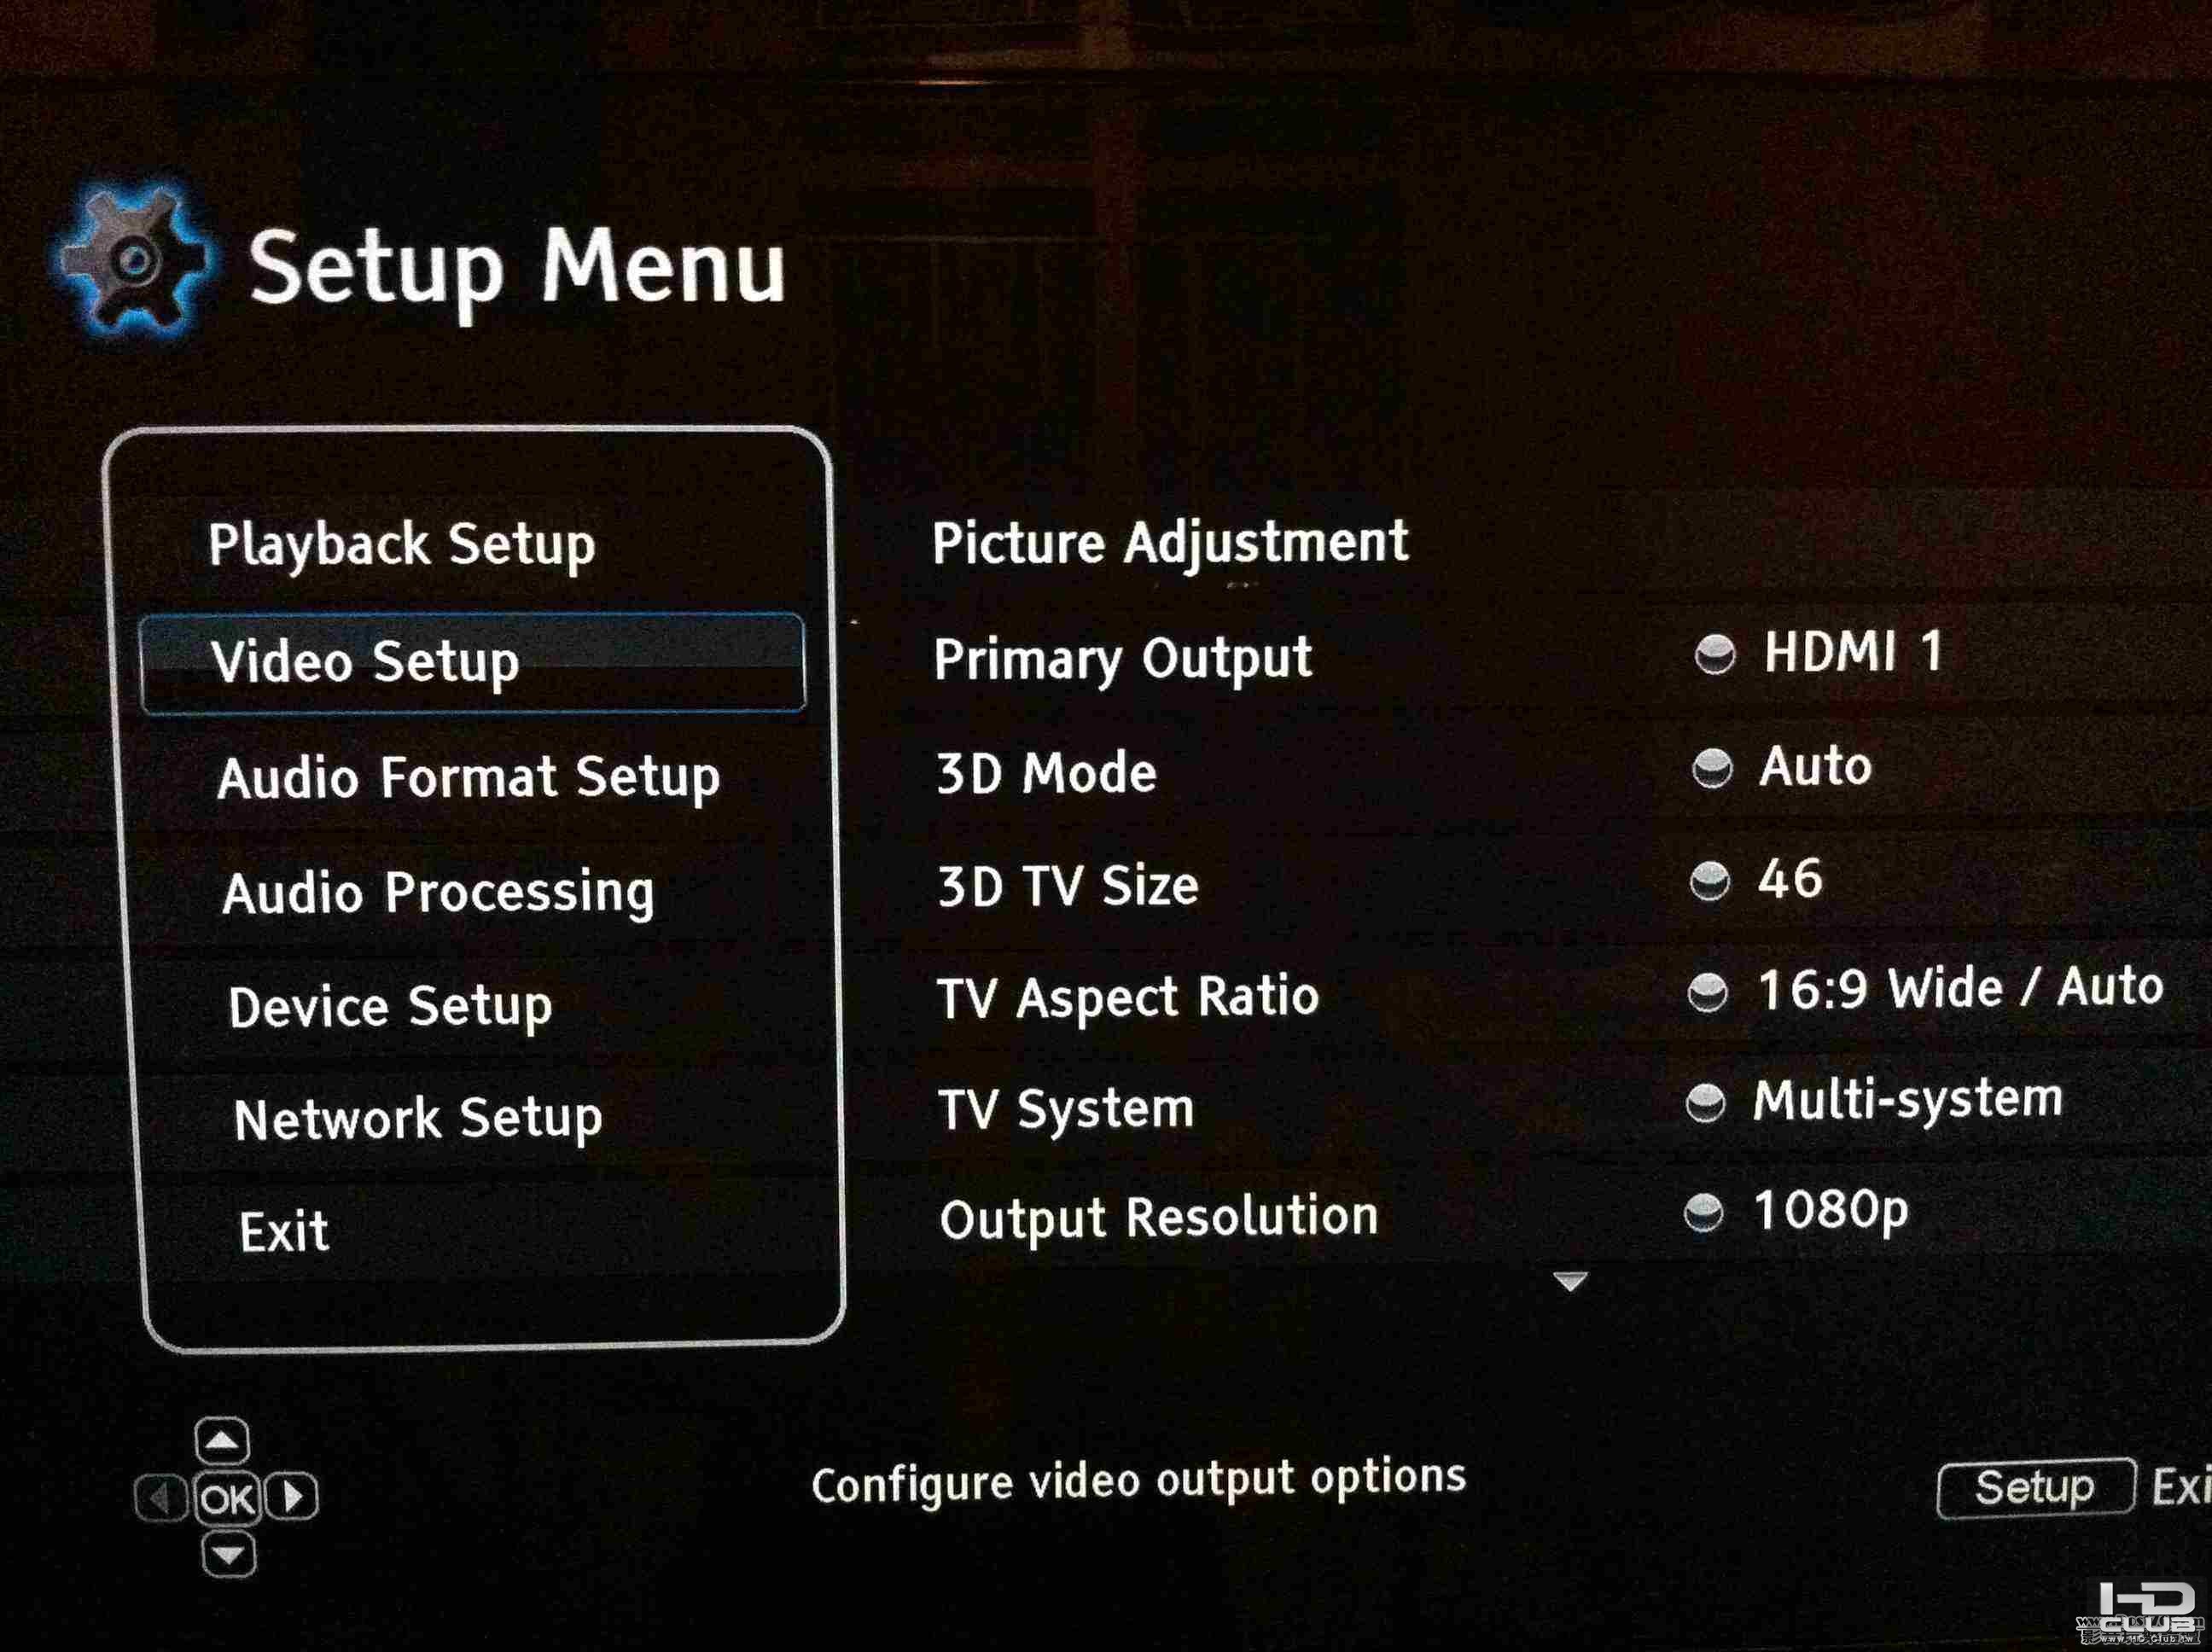 Video Setup => HDMI Options ==> Video only ( HDMI) Yes